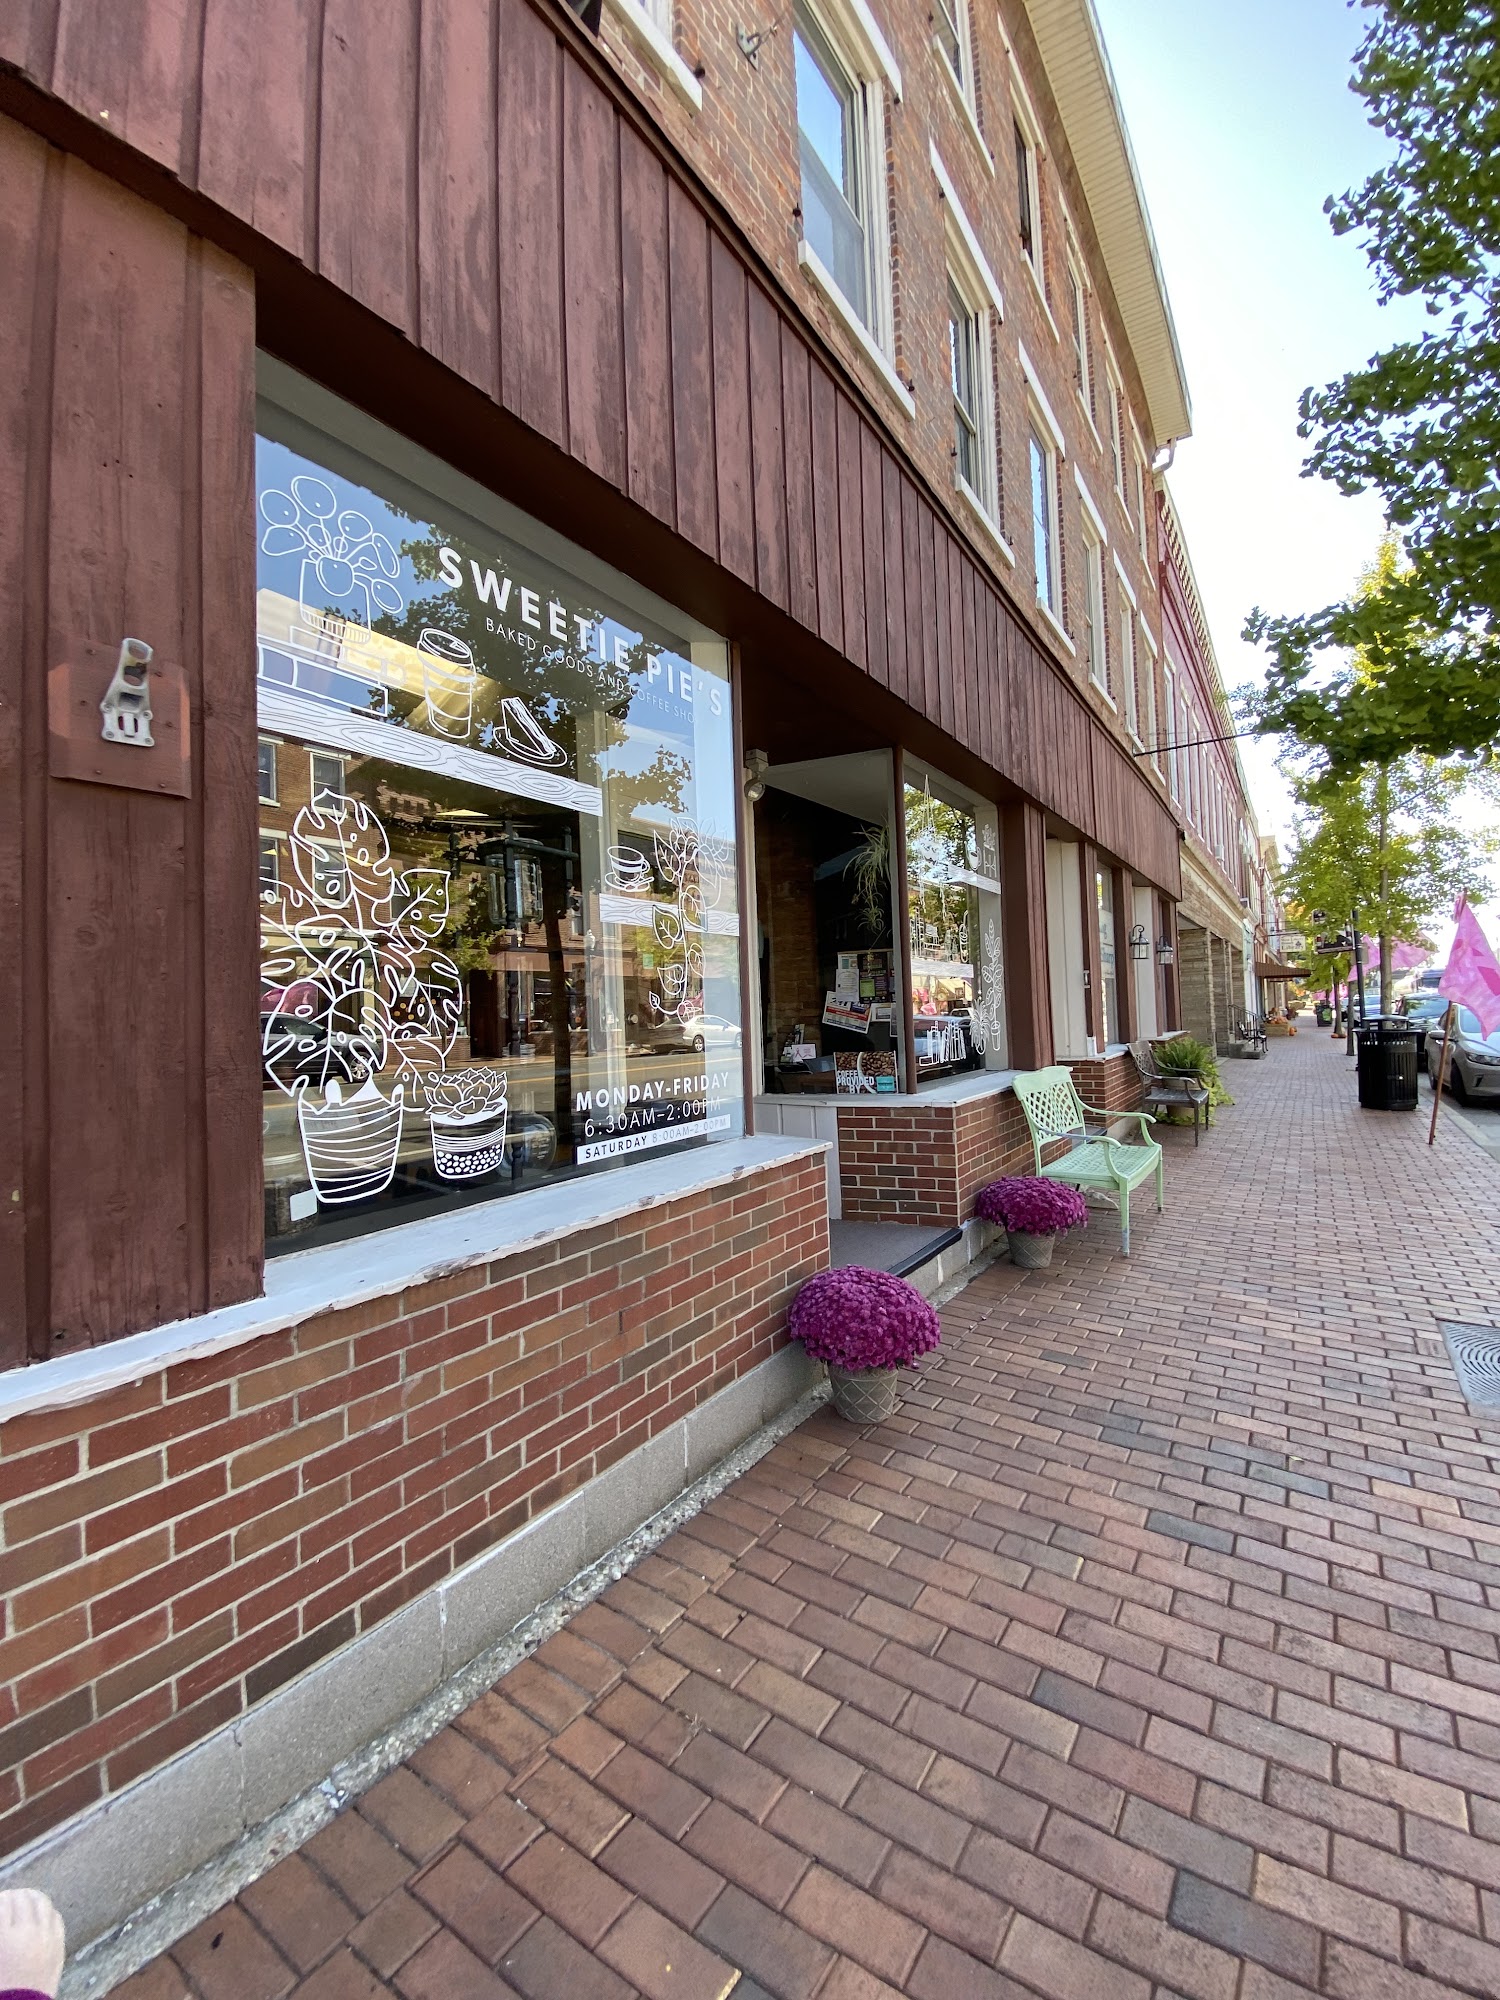 Sweetie Pie's Baked Goods and Coffee Shop